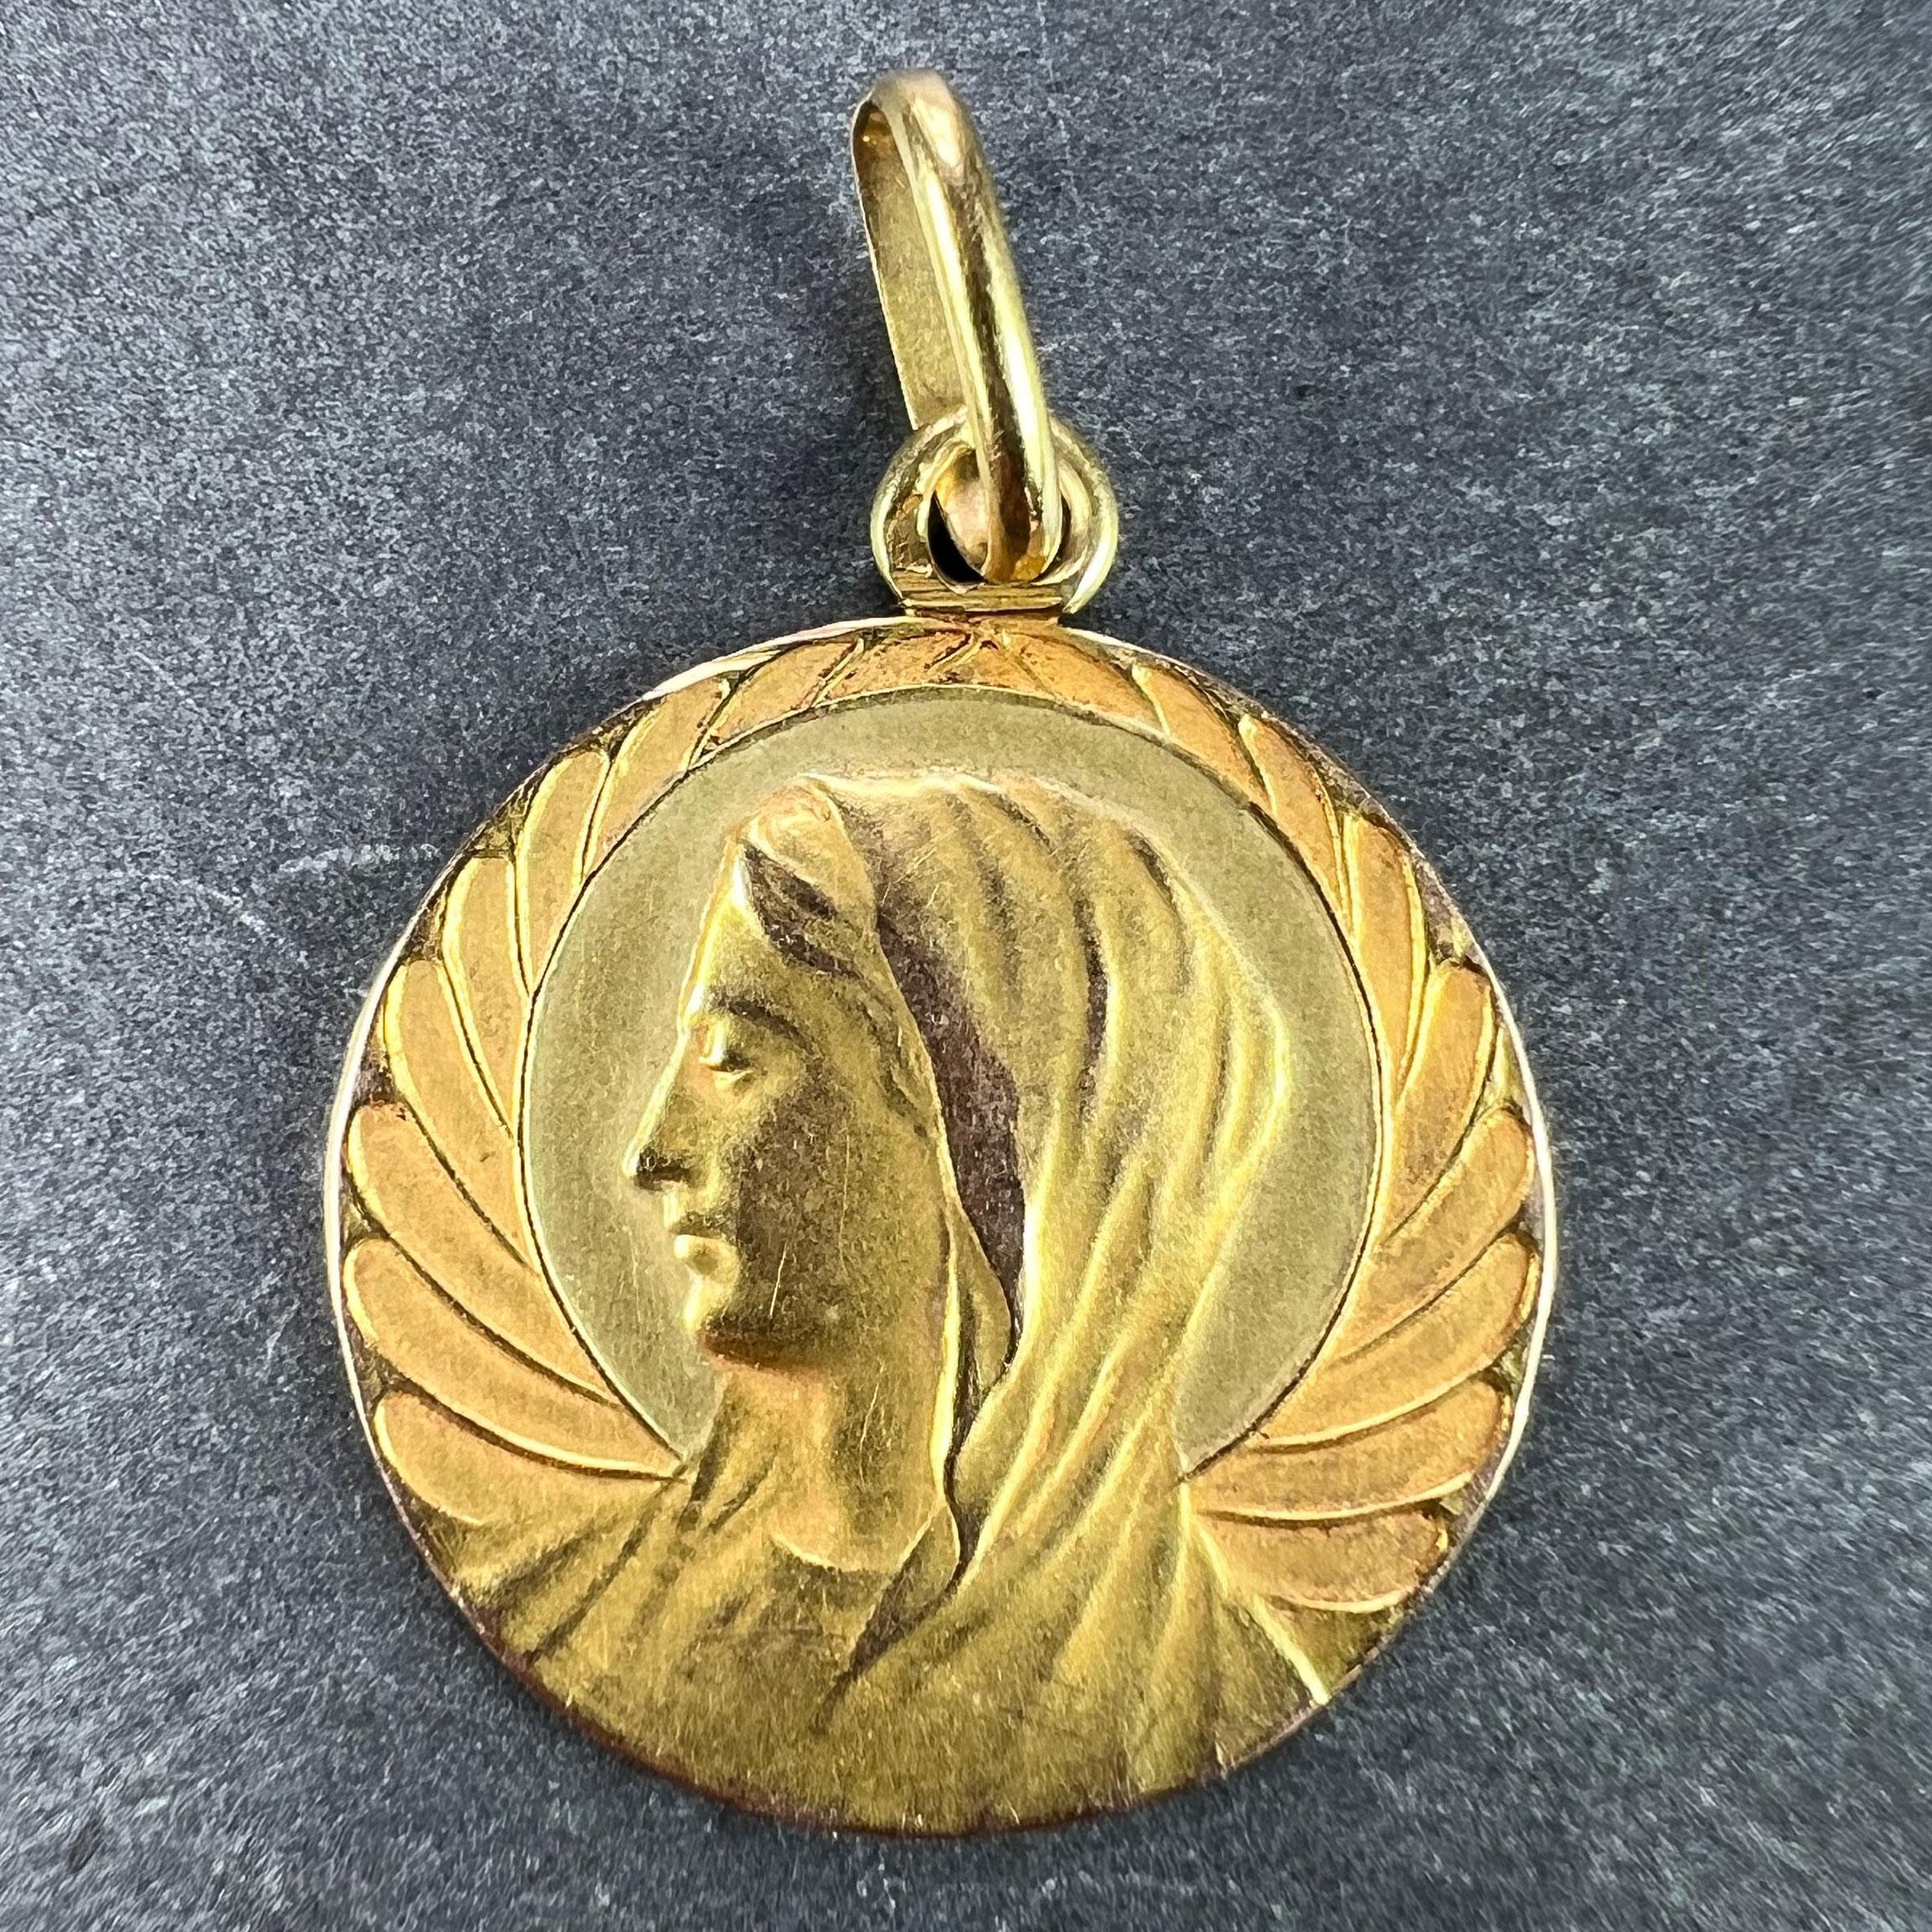 An 18 karat (18K) yellow gold religious charm pendant designed as a medal depicting the Virgin Mary with a halo against a scalloped background resembling angel wings. Stamped with the eagle's head mark for 18 karat gold and French manufacture. The